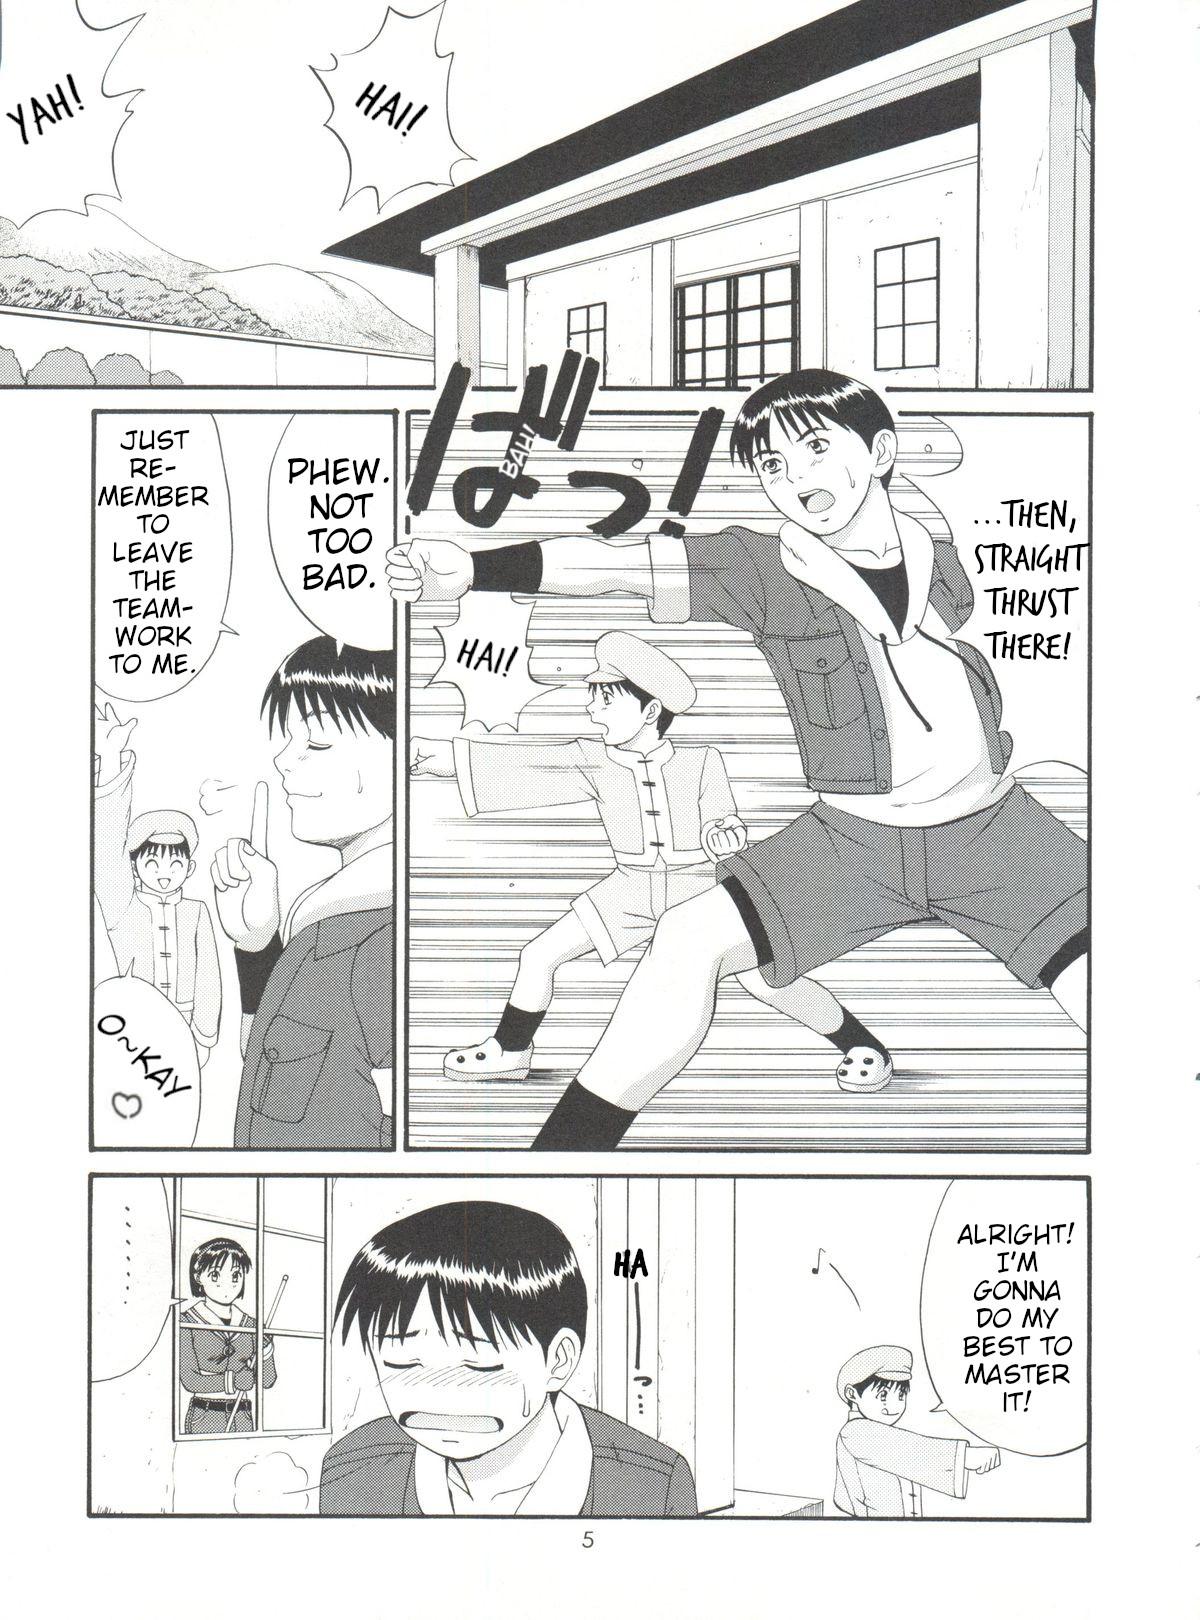 Bunduda [Saigado (Ishoku Dougen)] The Athena & Friends '99 (King of Fighters) English - King of fighters Tall - Page 4